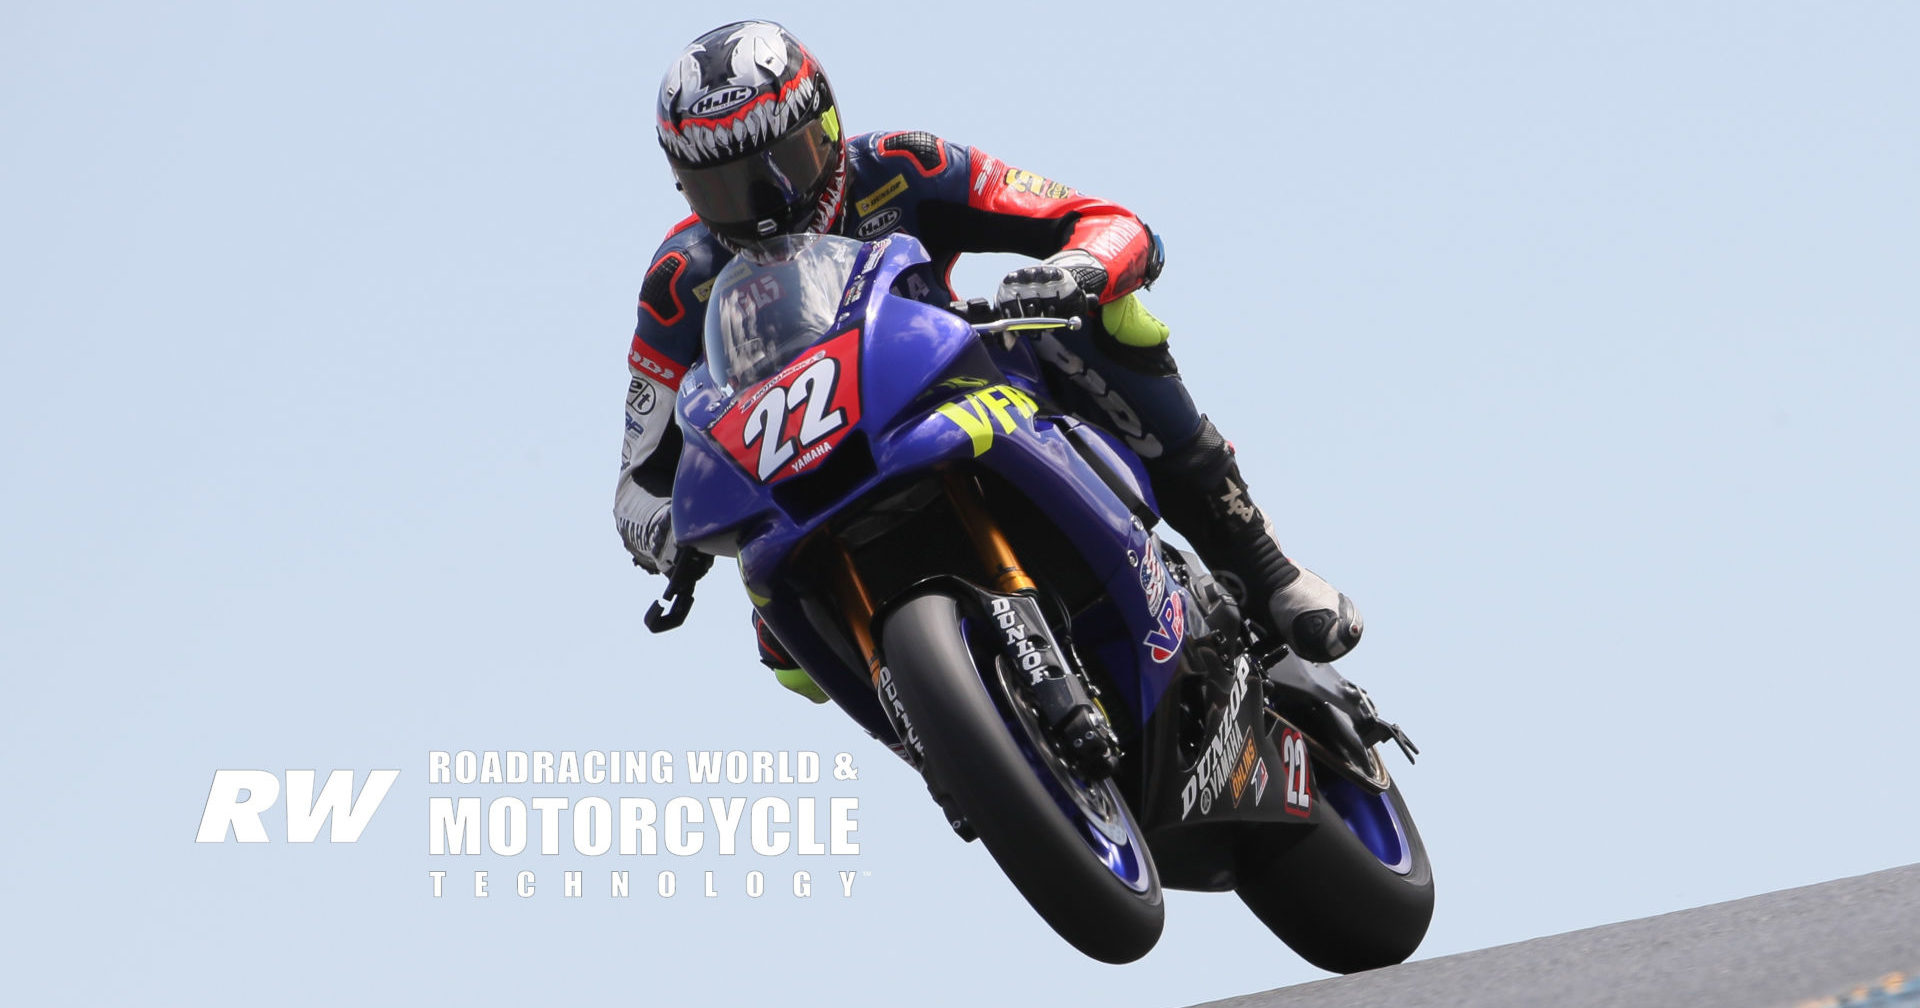 Ashton Yates (22) in action on his VFR Yamaha YZF-R1 Stock 1000 racebike at Sonoma Raceway in 2019. Photo by Brian J. Nelson.